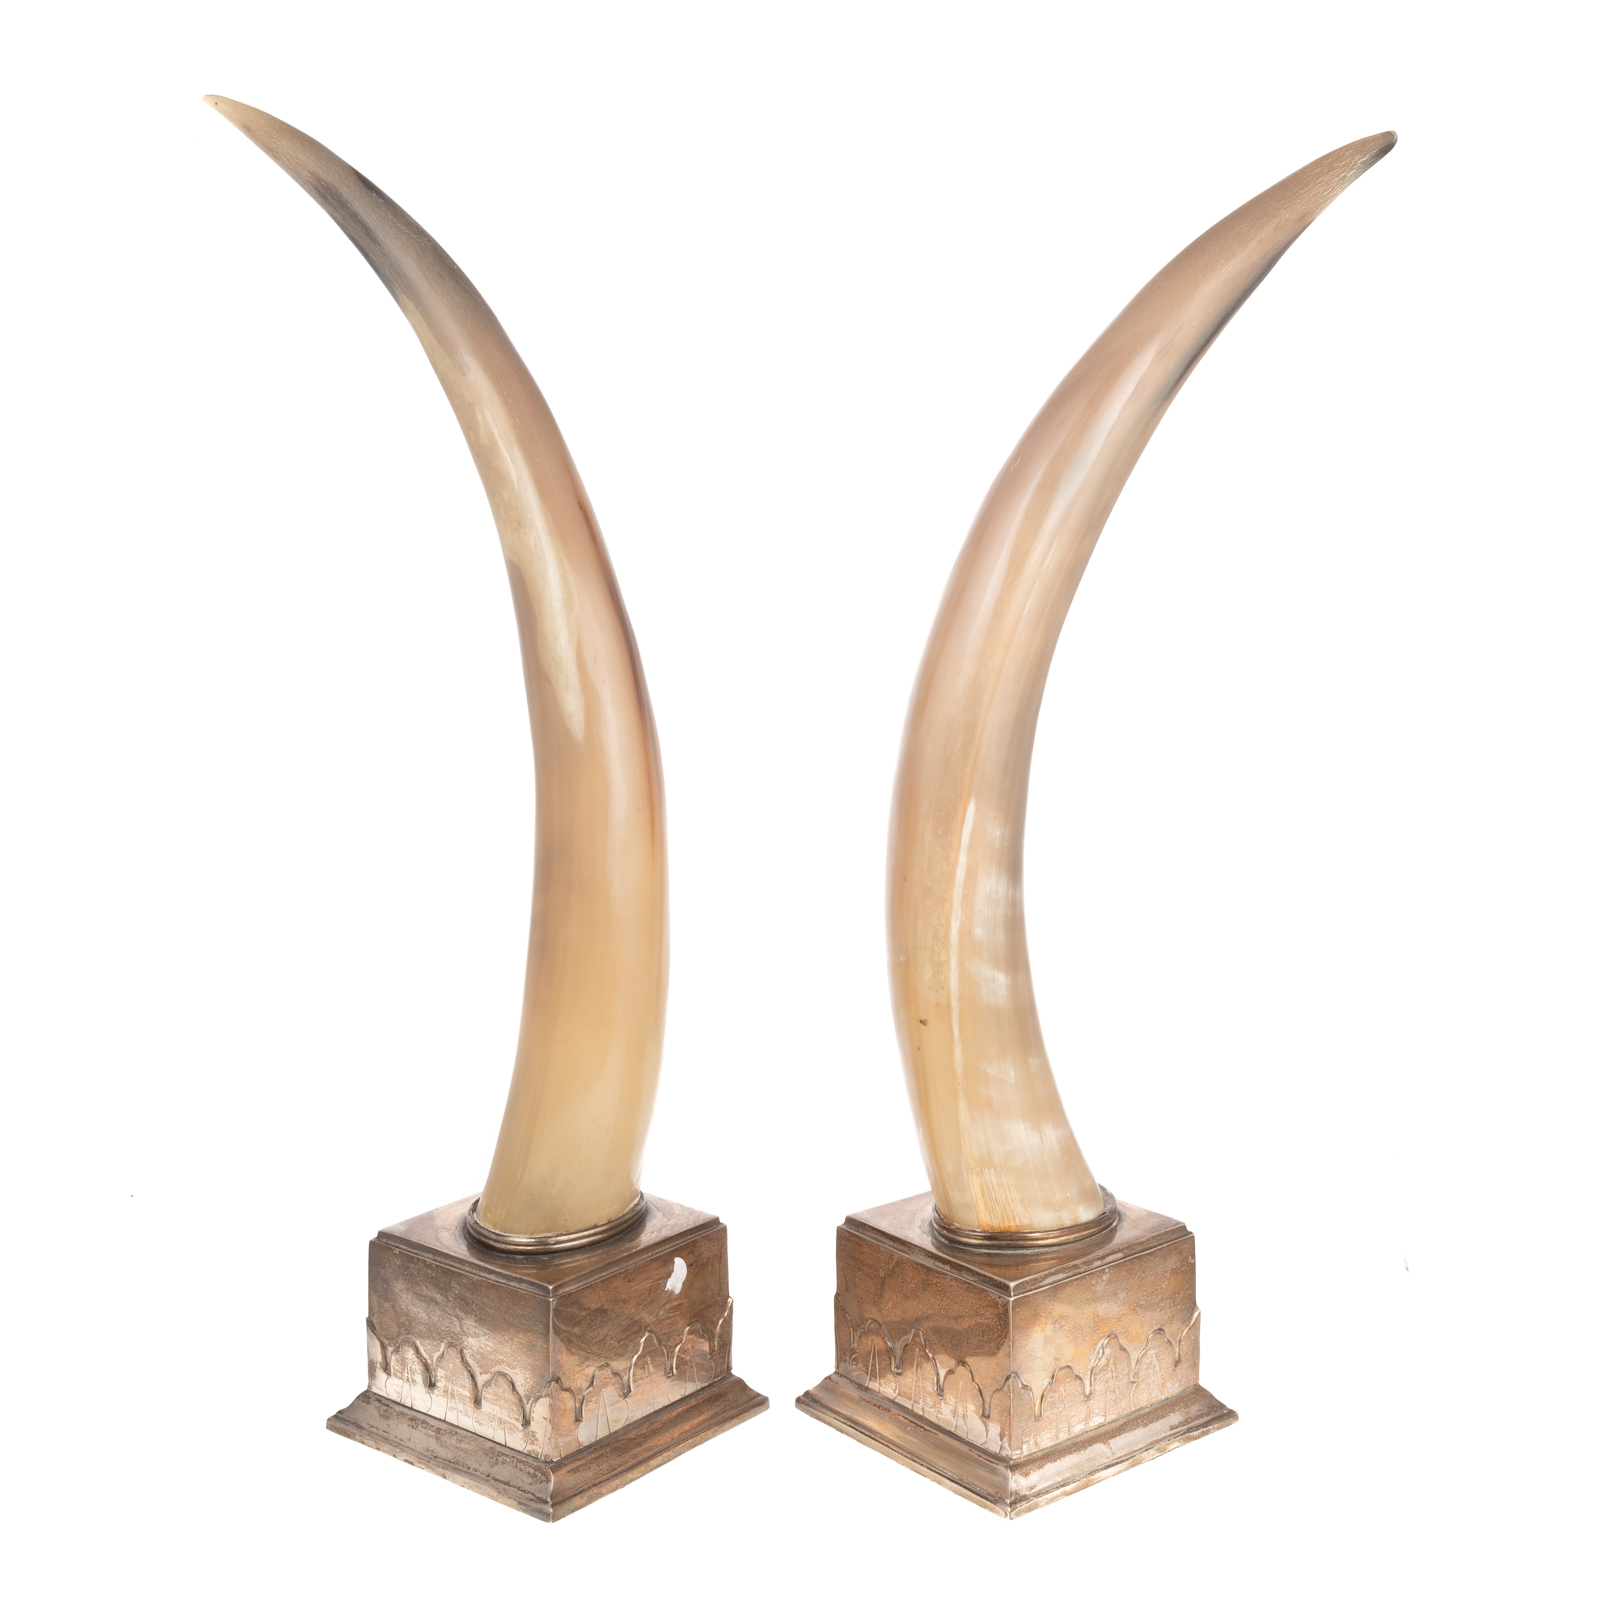 A PAIR OF DECORATIVE HORNS Dated 369908